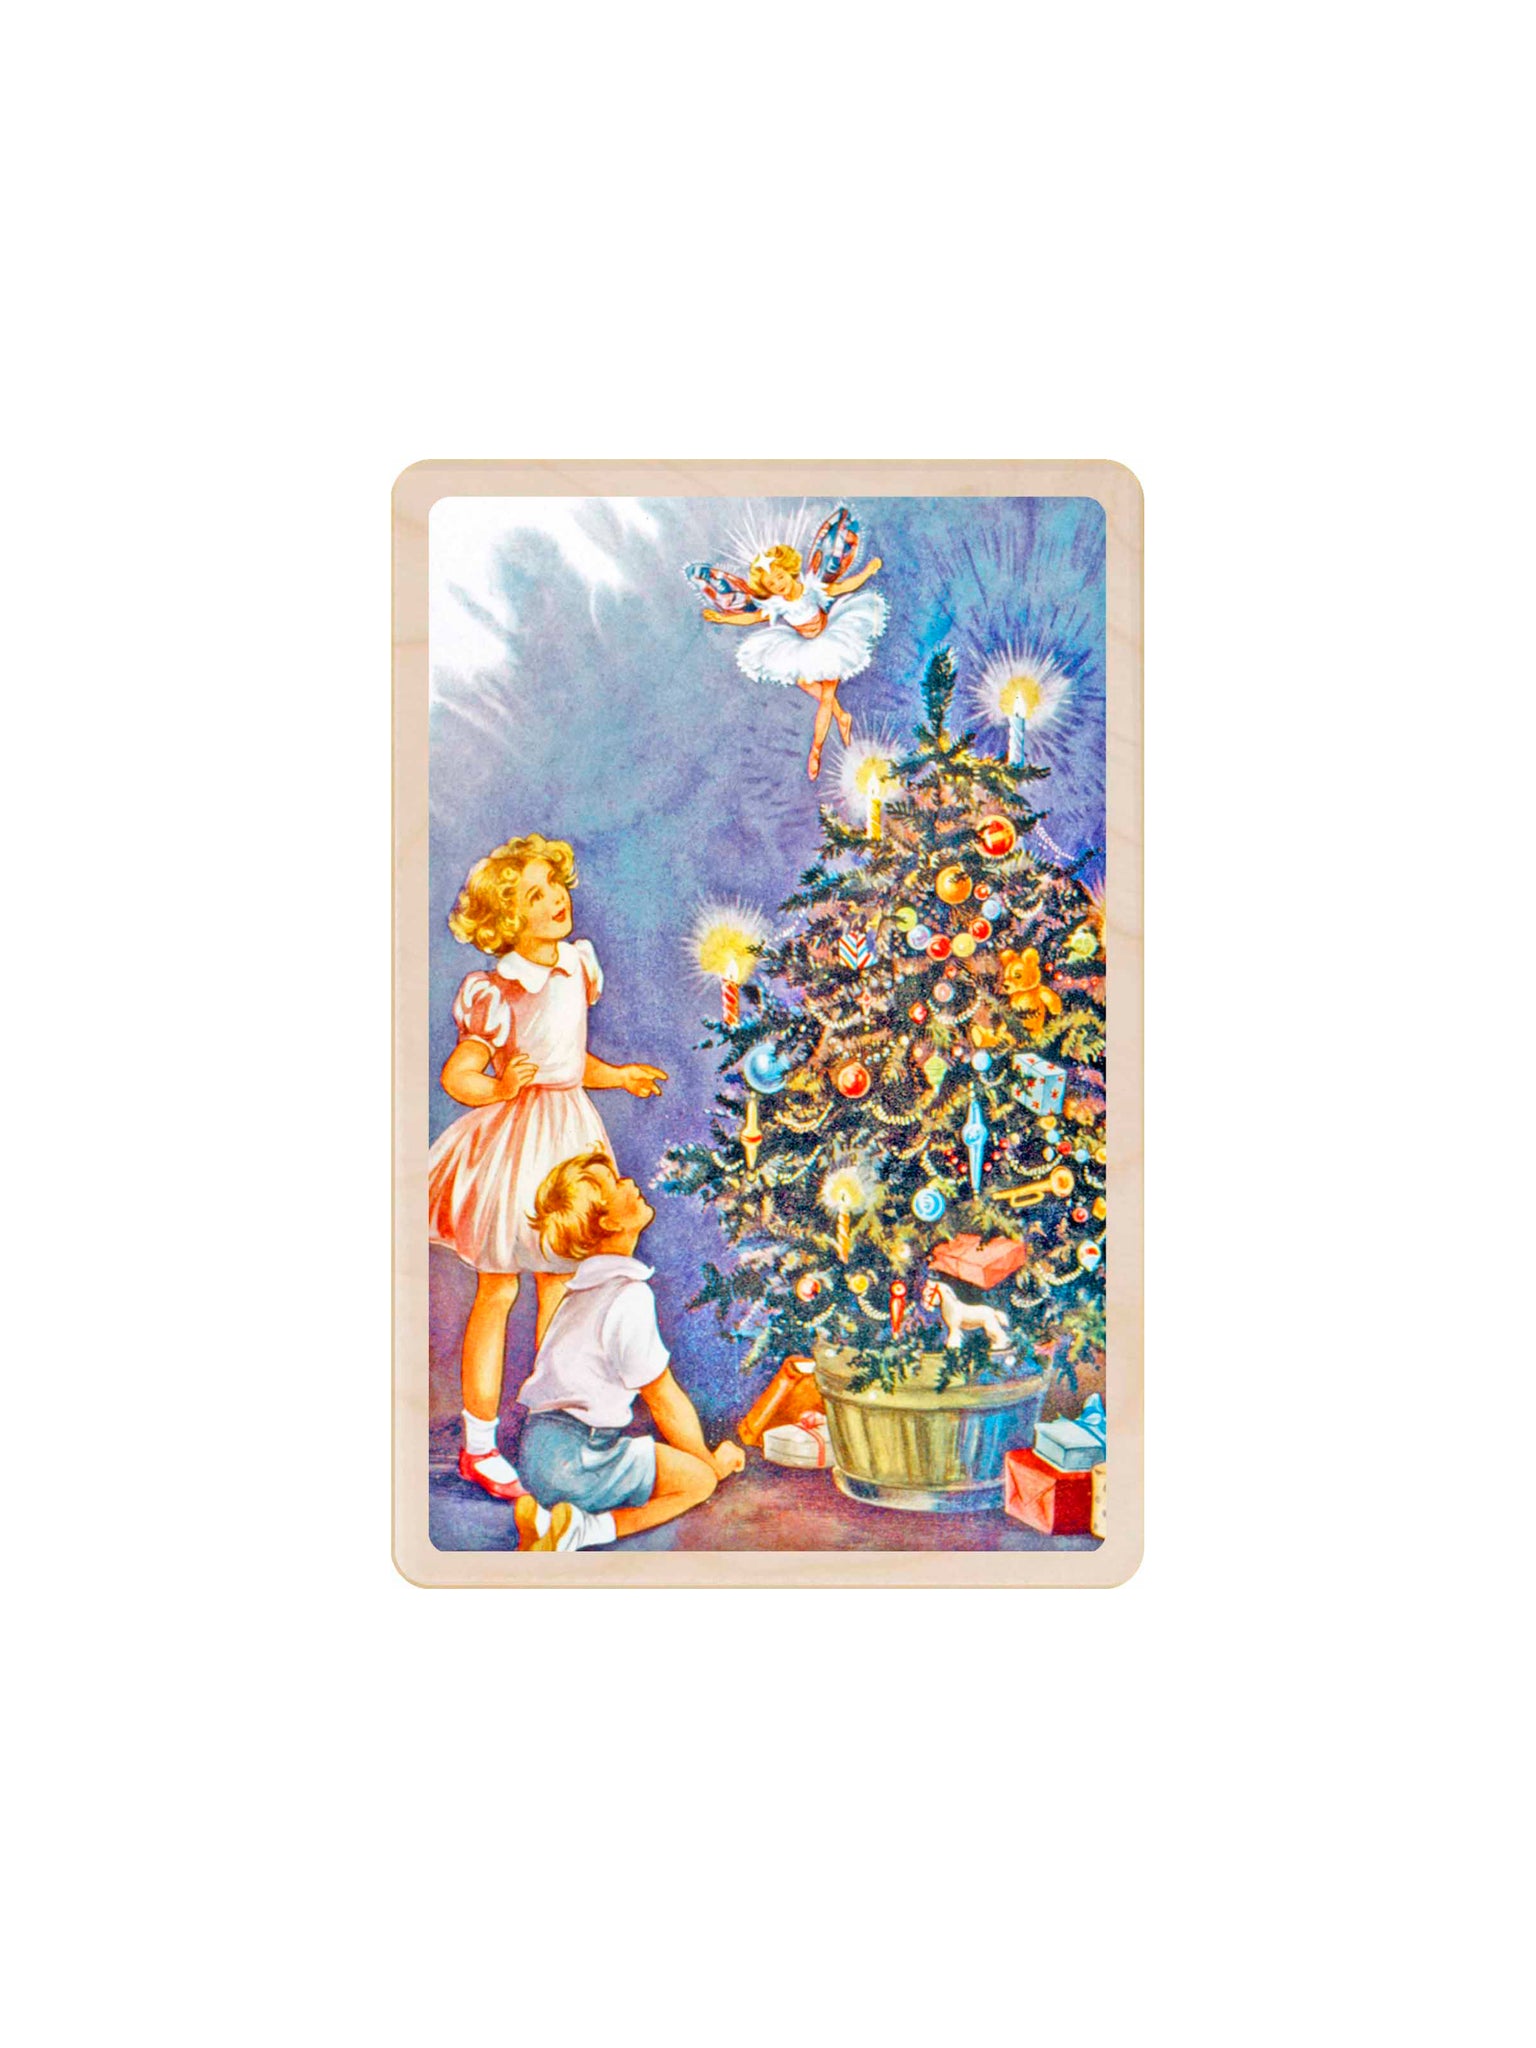 We Saw the Fairy Christmas Wooden Postcard Weston Table